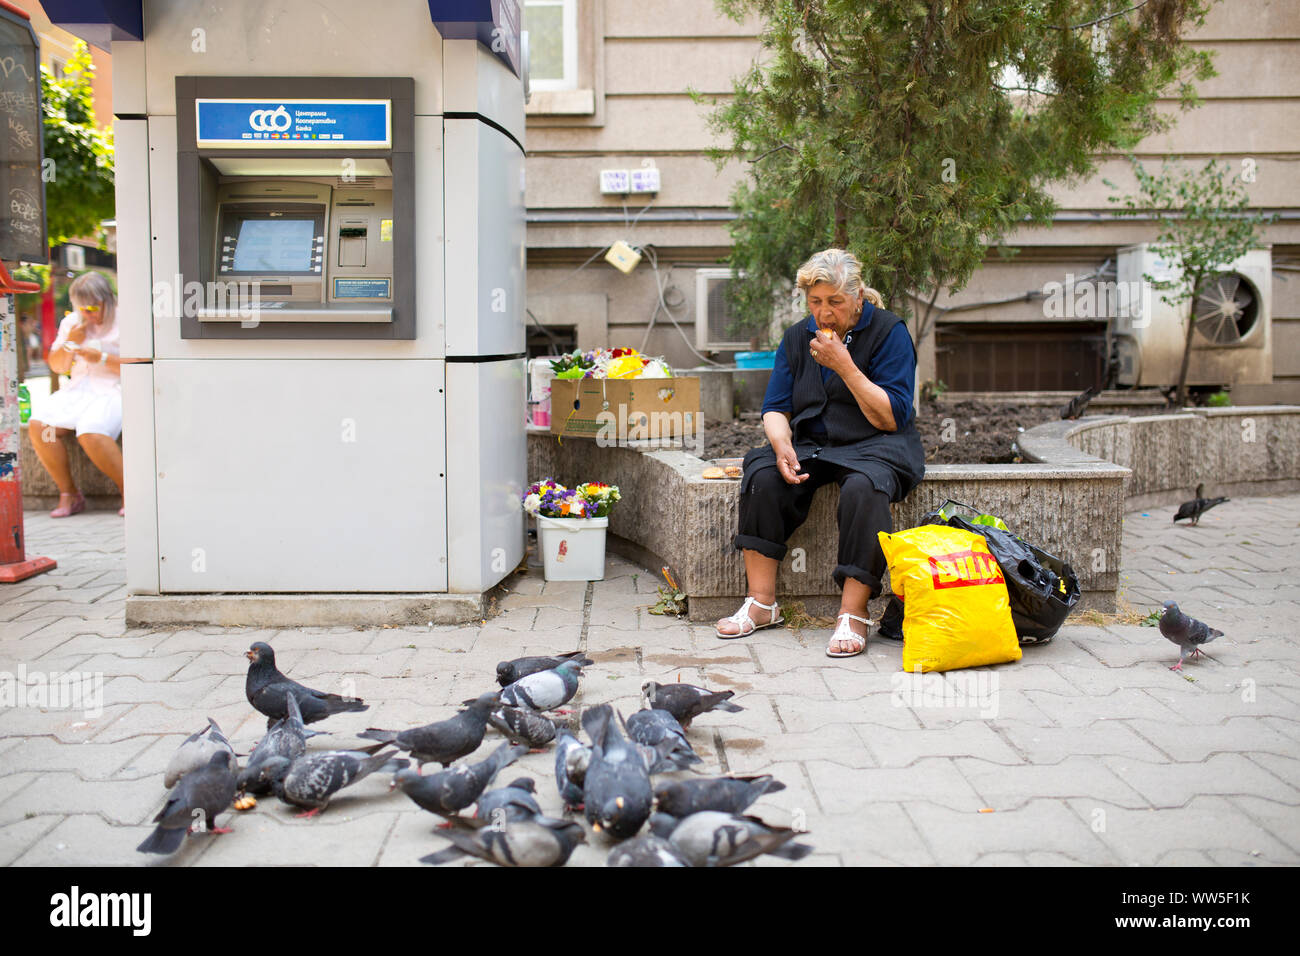 40-50 years old woman feeding pigeons in the town Stock Photo